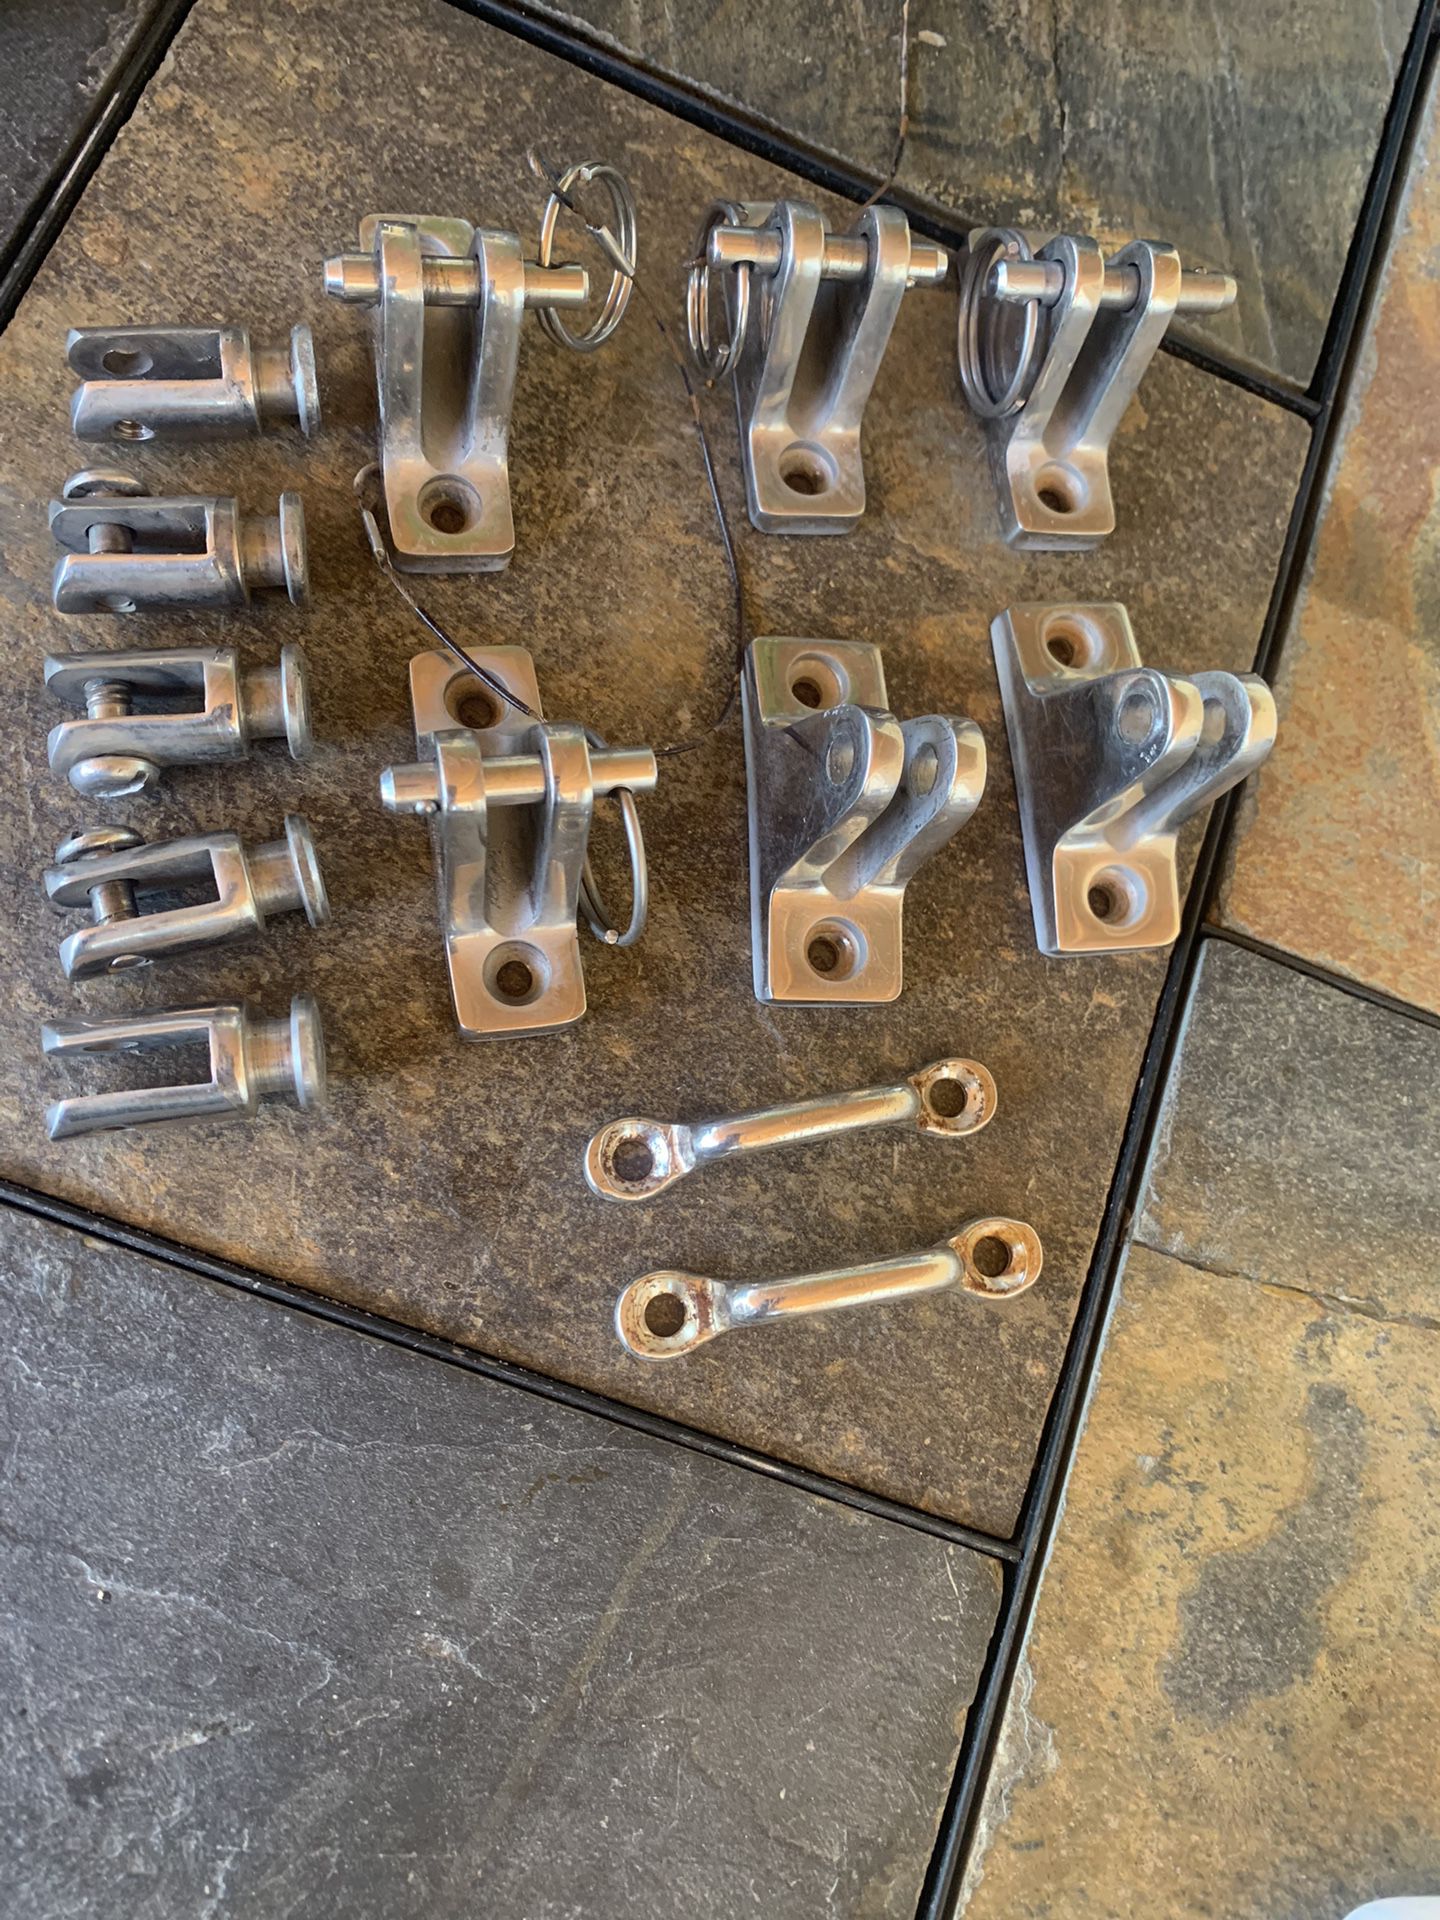 Stainless Bimini Top Parts